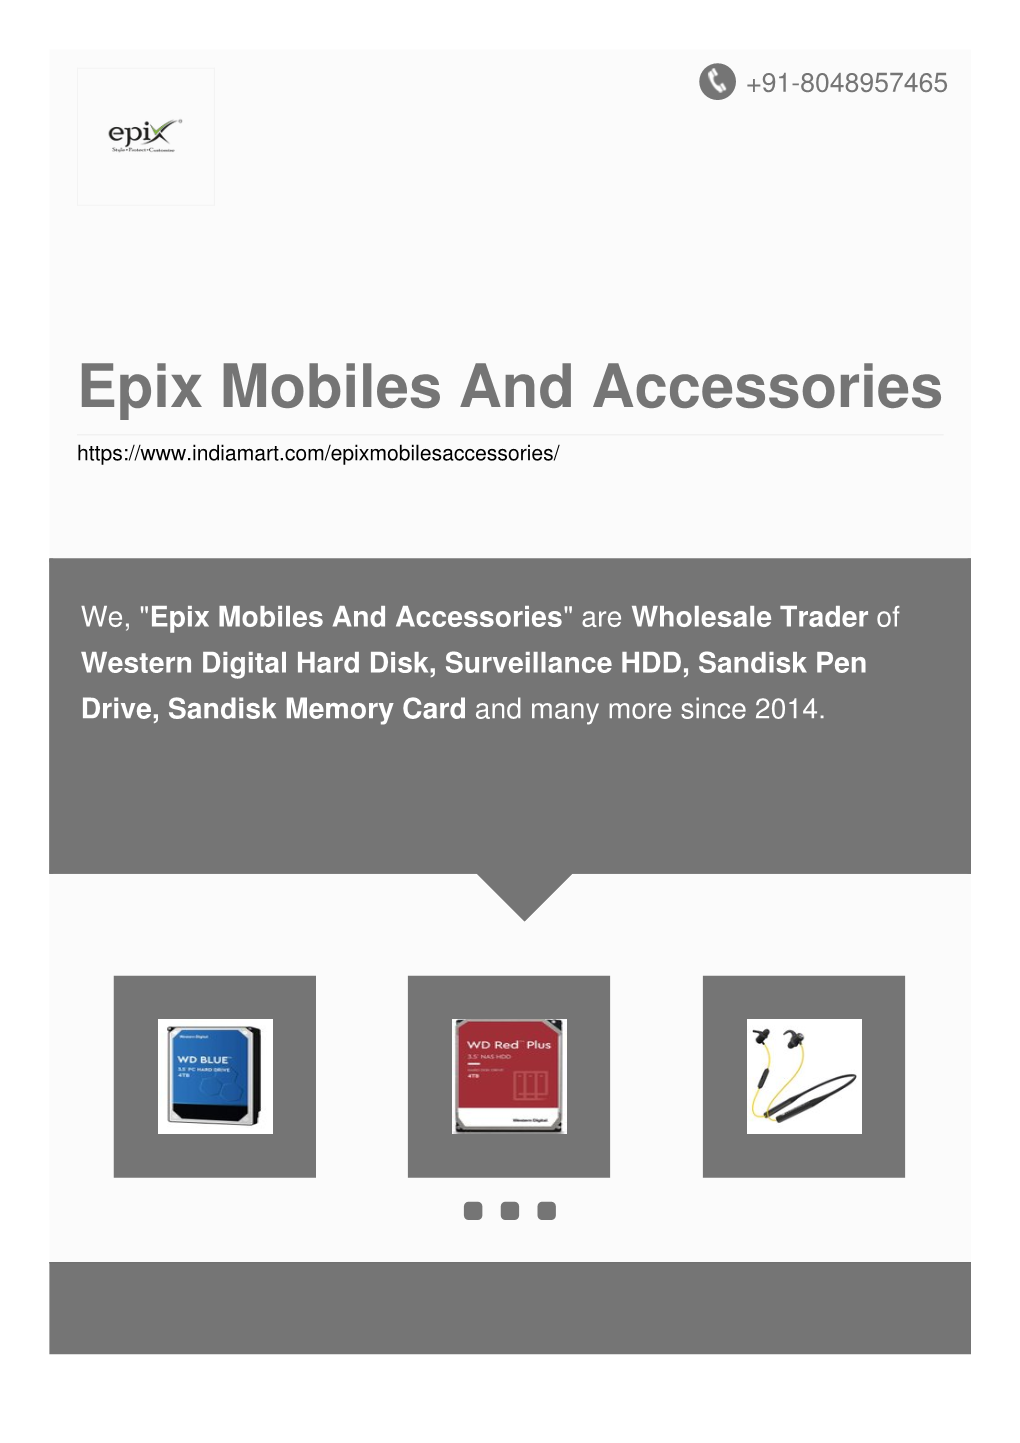 Epix Mobiles and Accessories